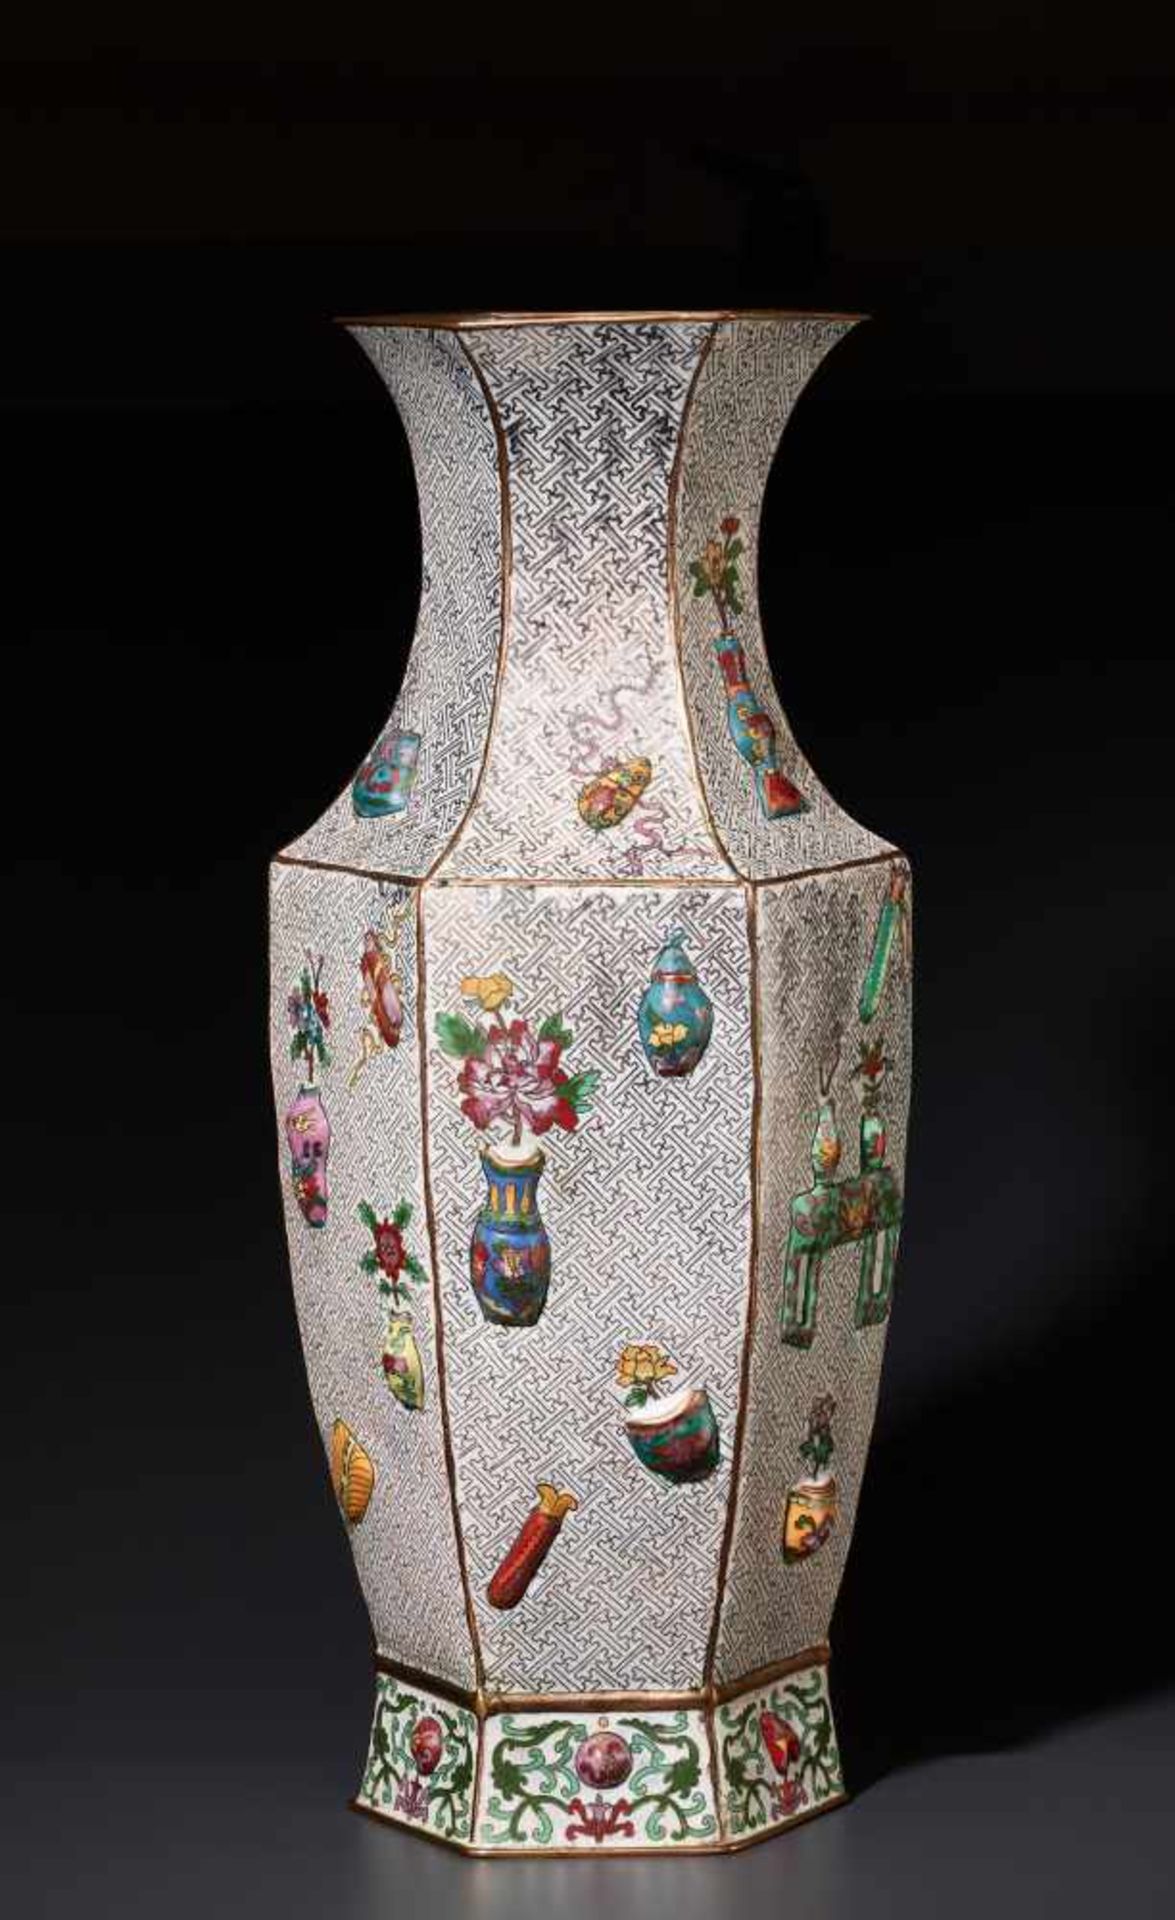 A LARGE MOLDED CLOISONNE FLOOR VASE WITH LITERATI TREASURES, QING DYNASTY Cloisonné enamel on - Image 6 of 8